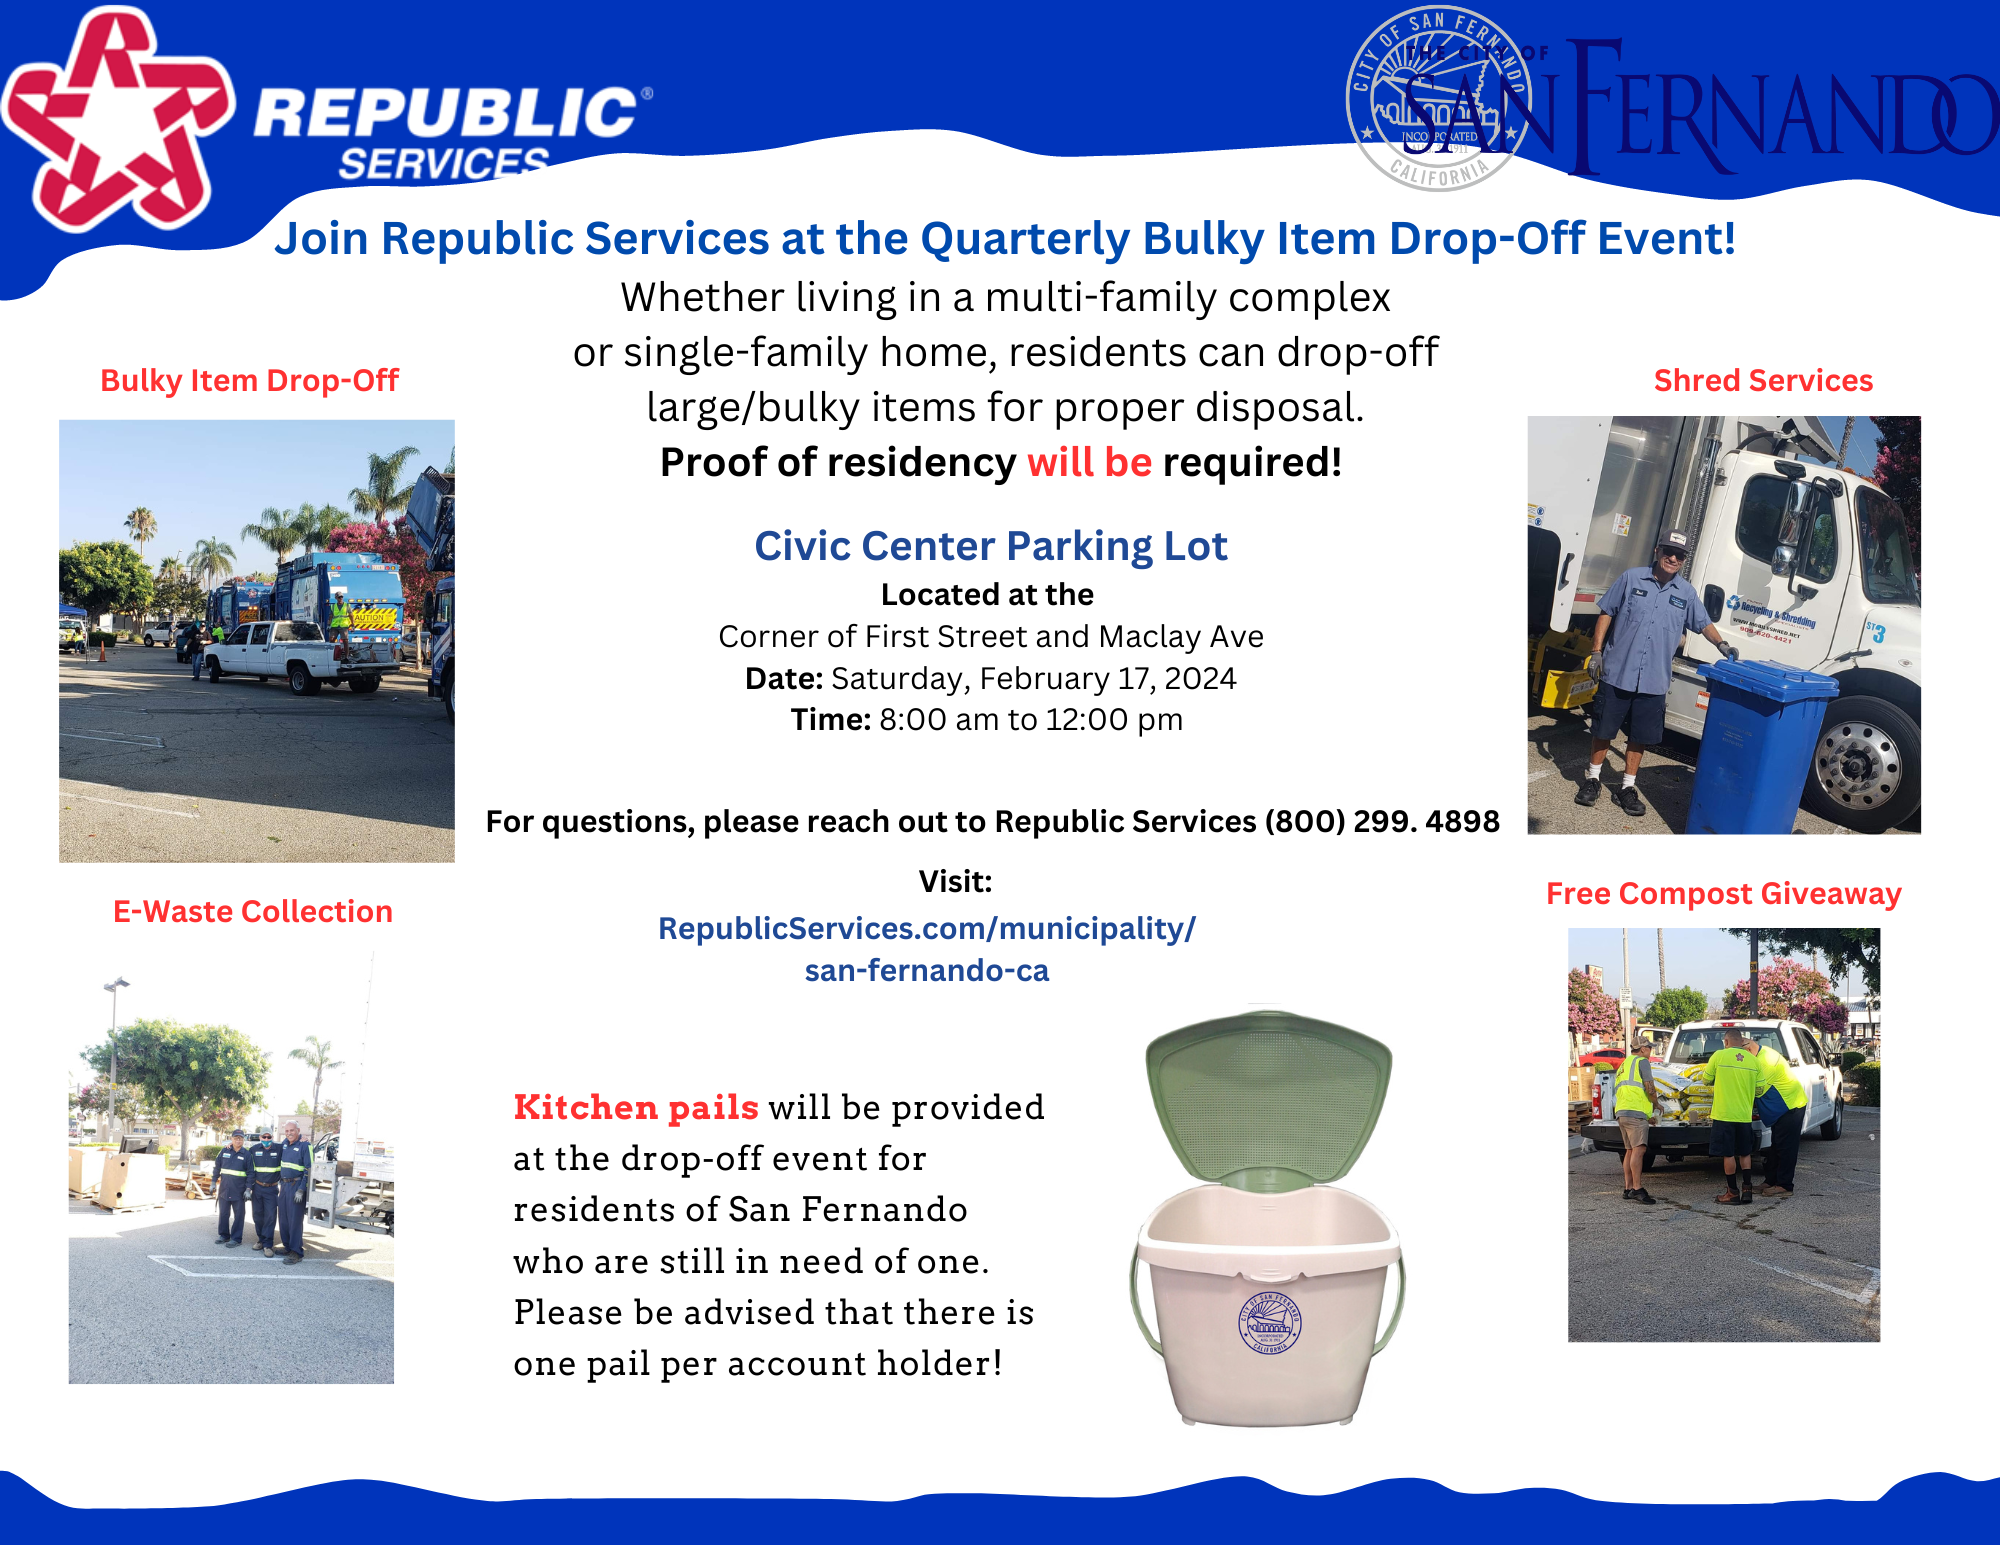 Bulky Item Drop Off Event Flyer_(2-17-24) Eng